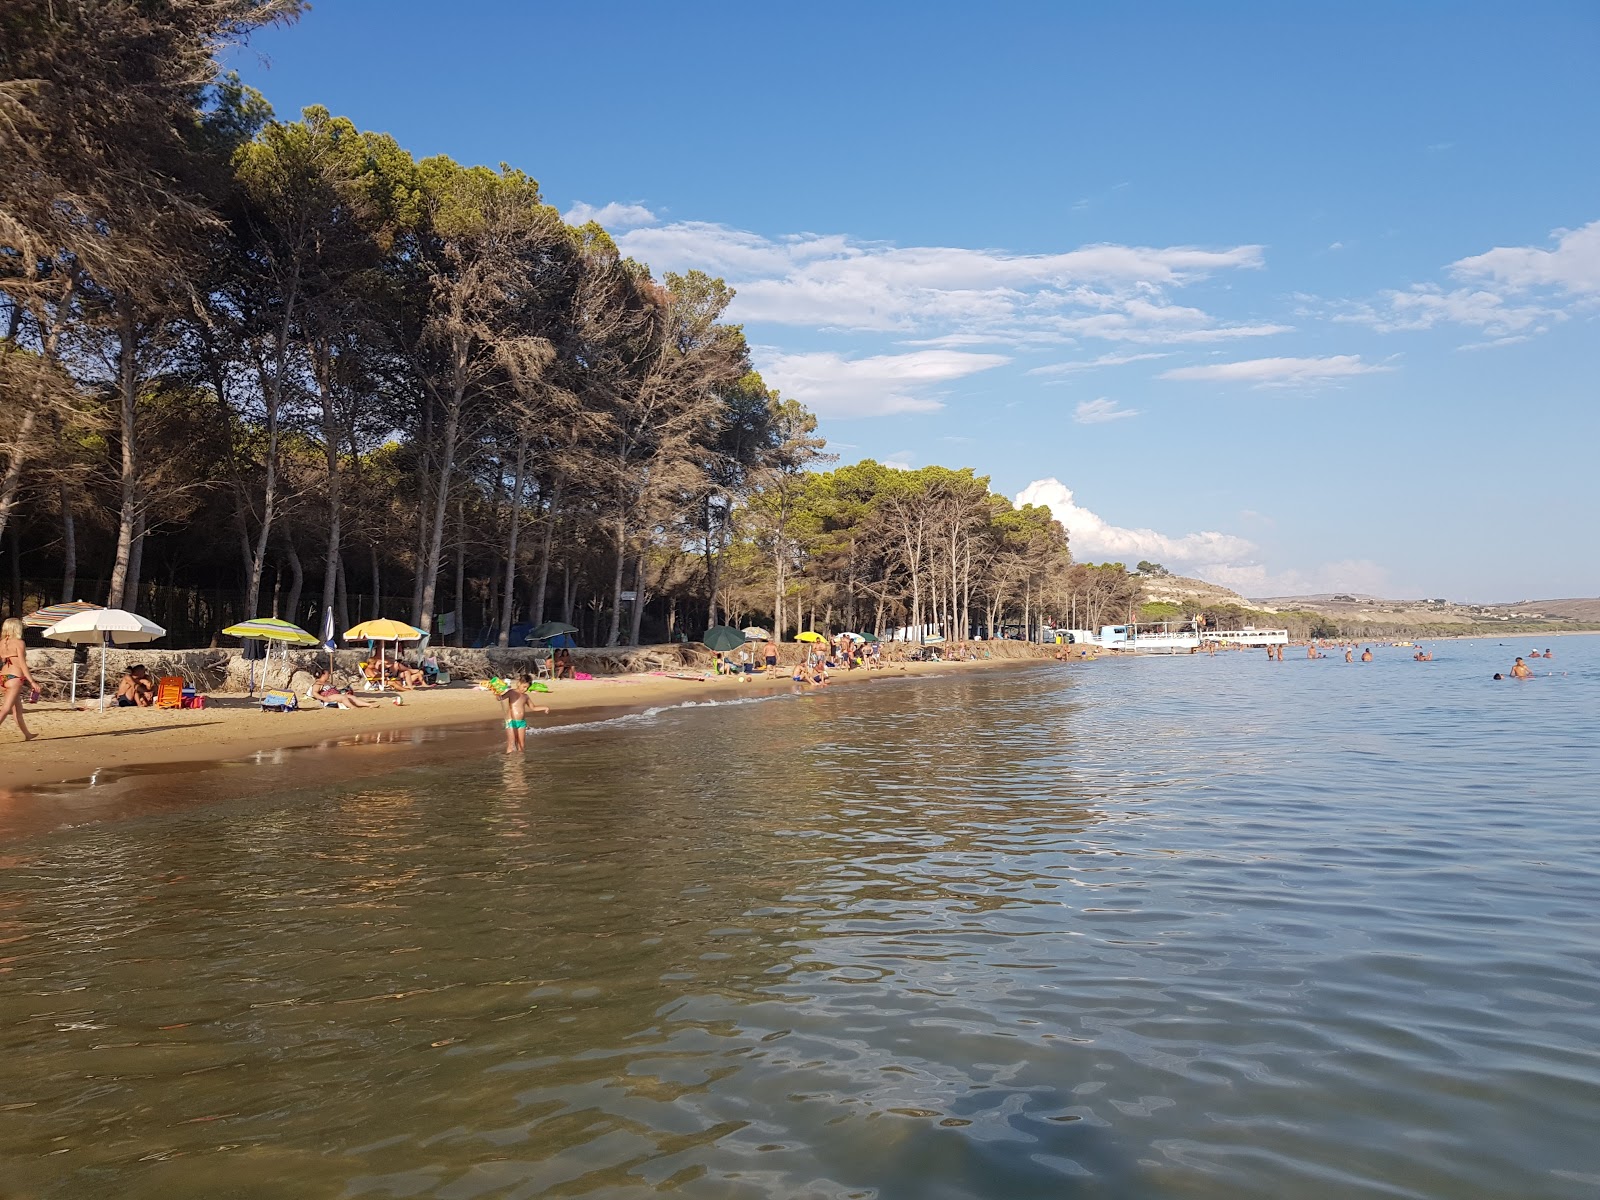 Photo of Spiaggia Di Eraclea Minoa - recommended for family travellers with kids